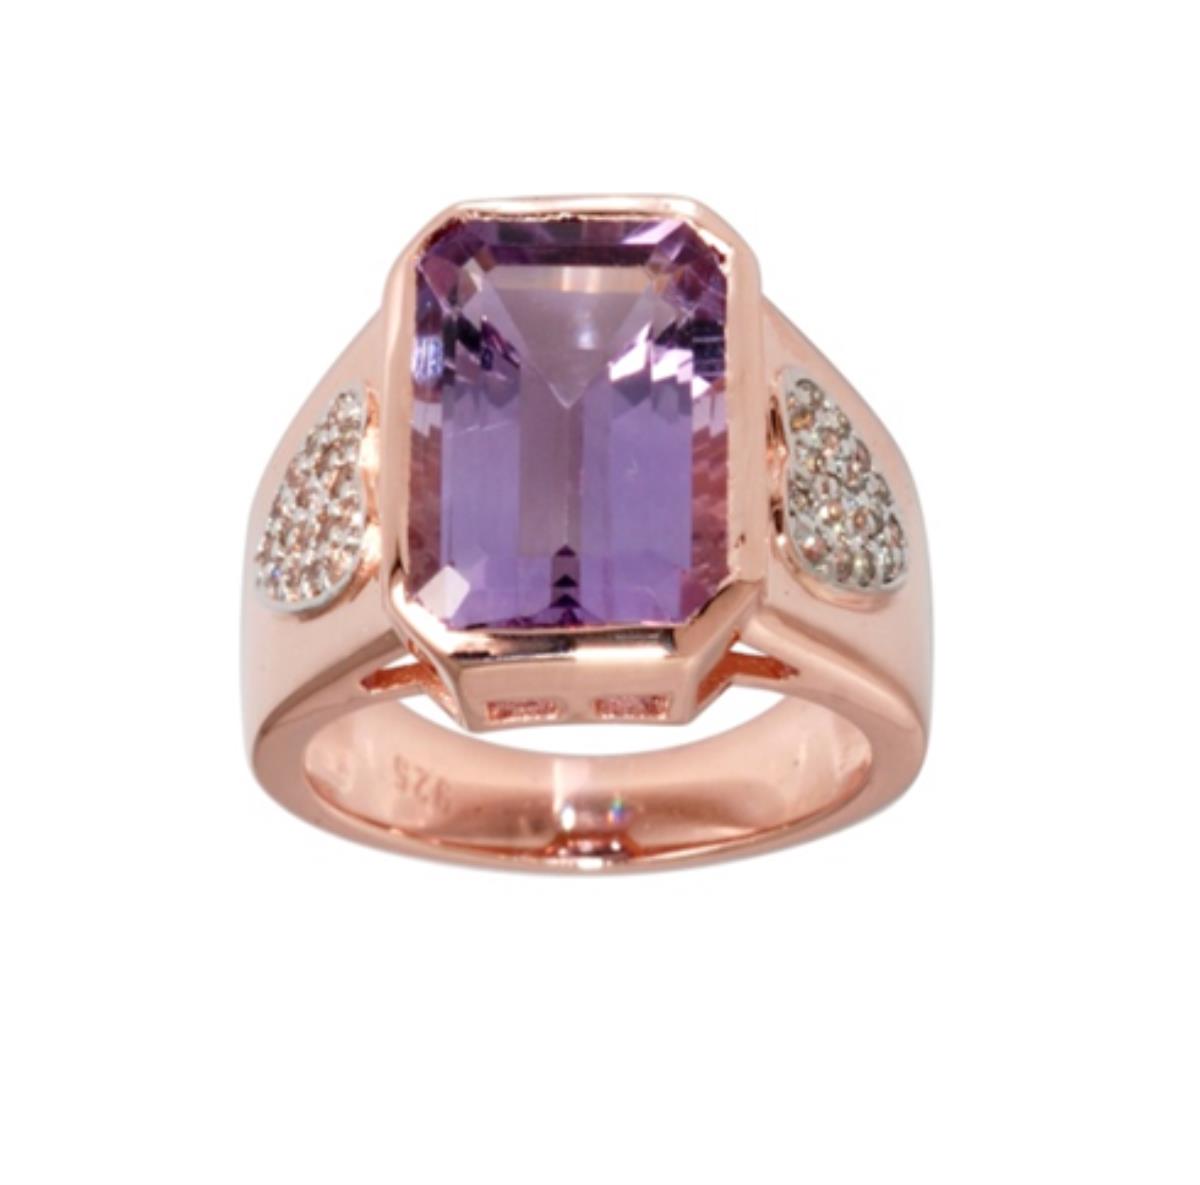 10K Rose Gold 14x10mm Amethyst Octagonal Cut with White Zircon Pave Sides Fashion Ring